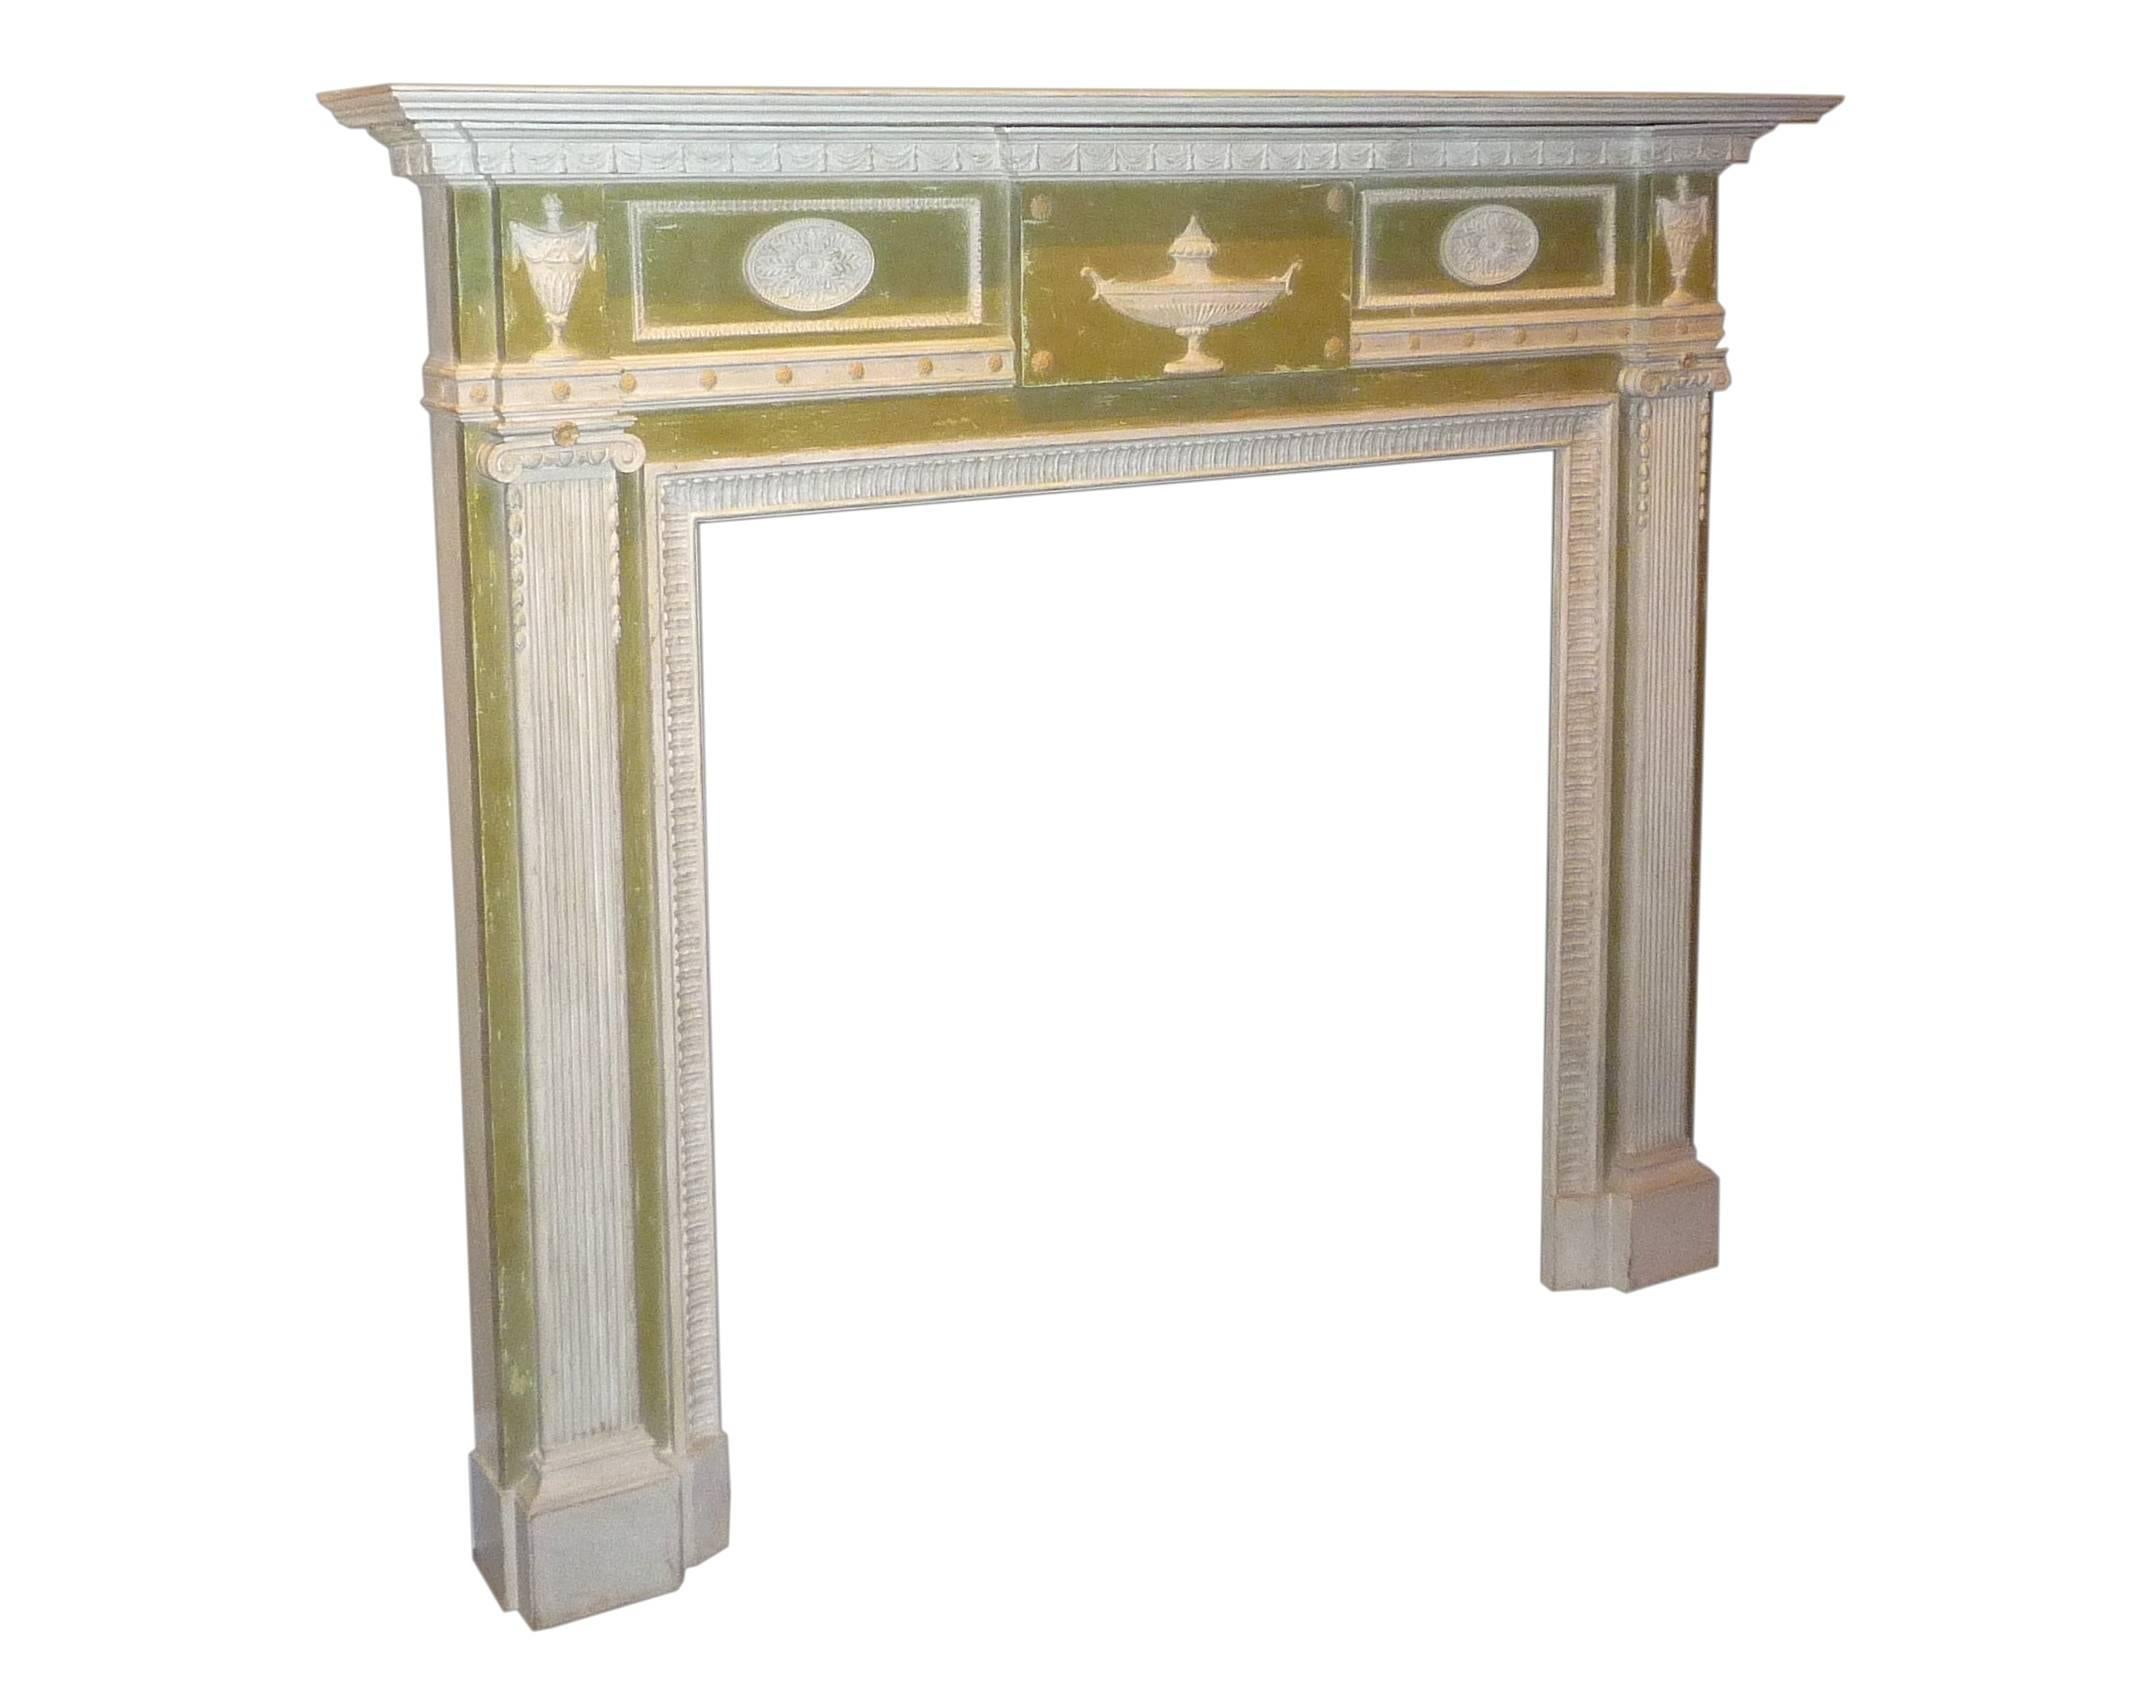 A fine English neoclassical carved and painted (white and Adam green) wood fire surround, in the style of Robert Adam, late 19th century.

Inside dimensions: Length 42